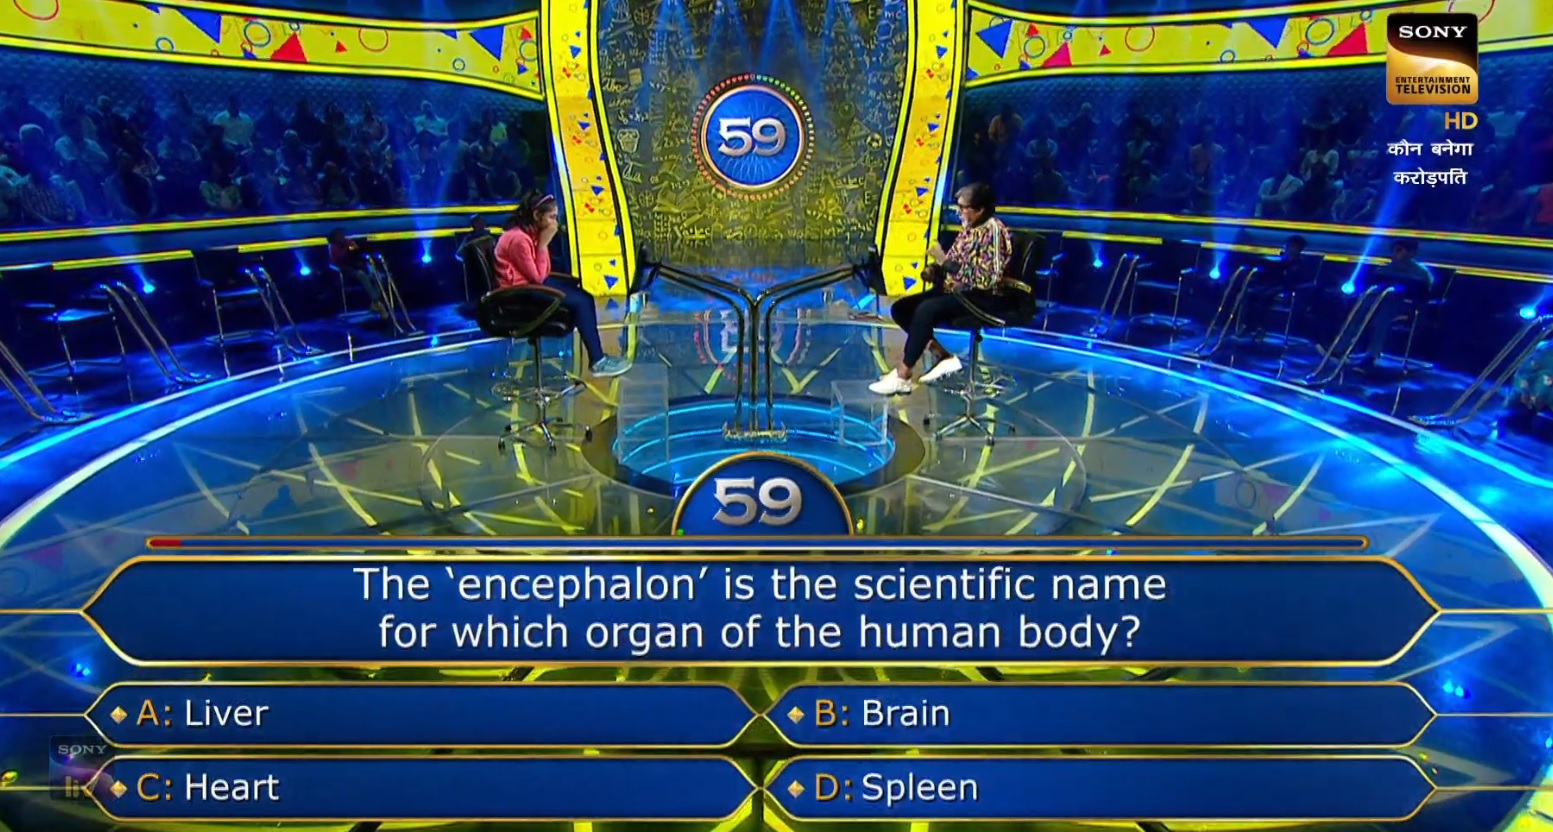 Ques : The ‘encephalon’ is the scientific name for which organ of the human body?